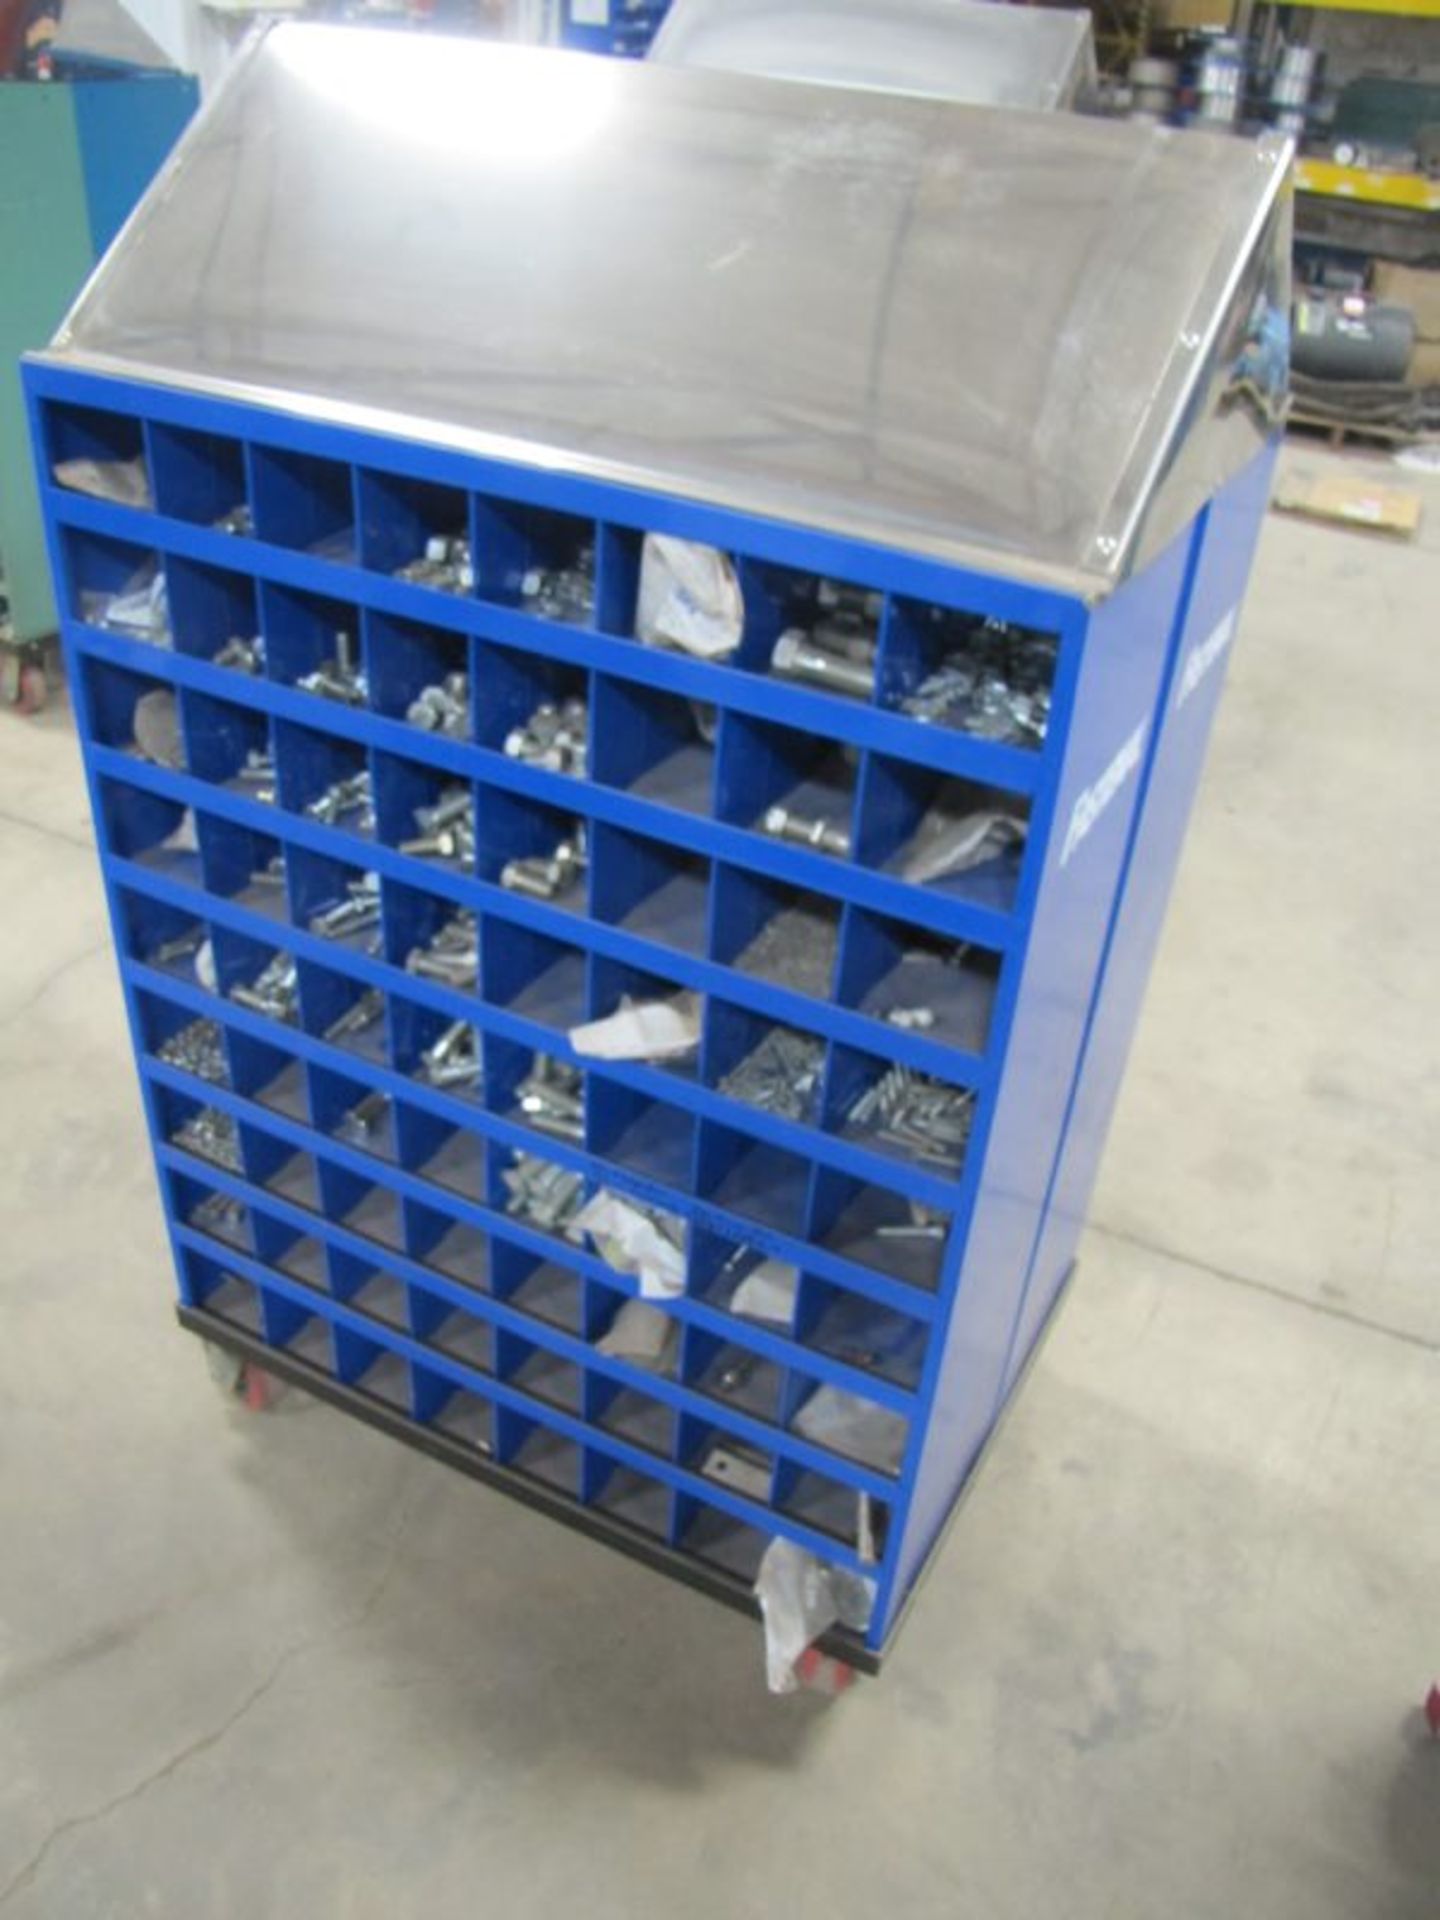 Fastenal Portable Rolling Bin with Split Washers, Flat Washers, Nuts and Bolts as Shown - Image 2 of 4